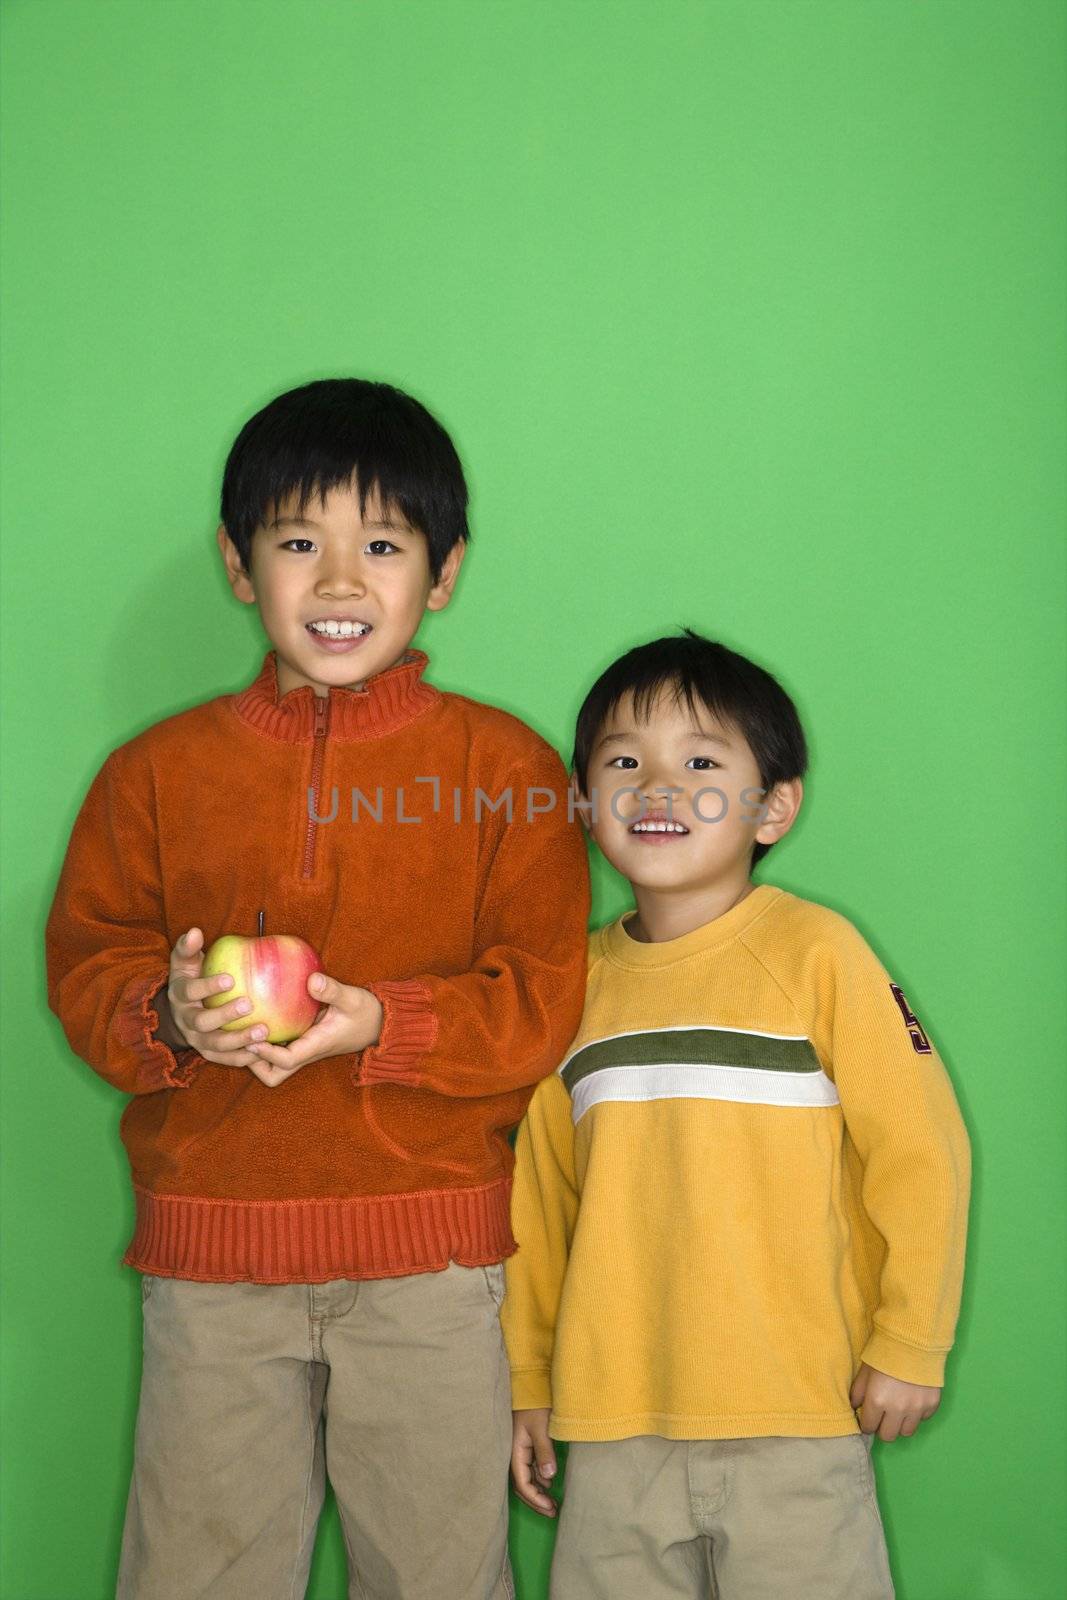 Two Asian boys holding apple smiling.